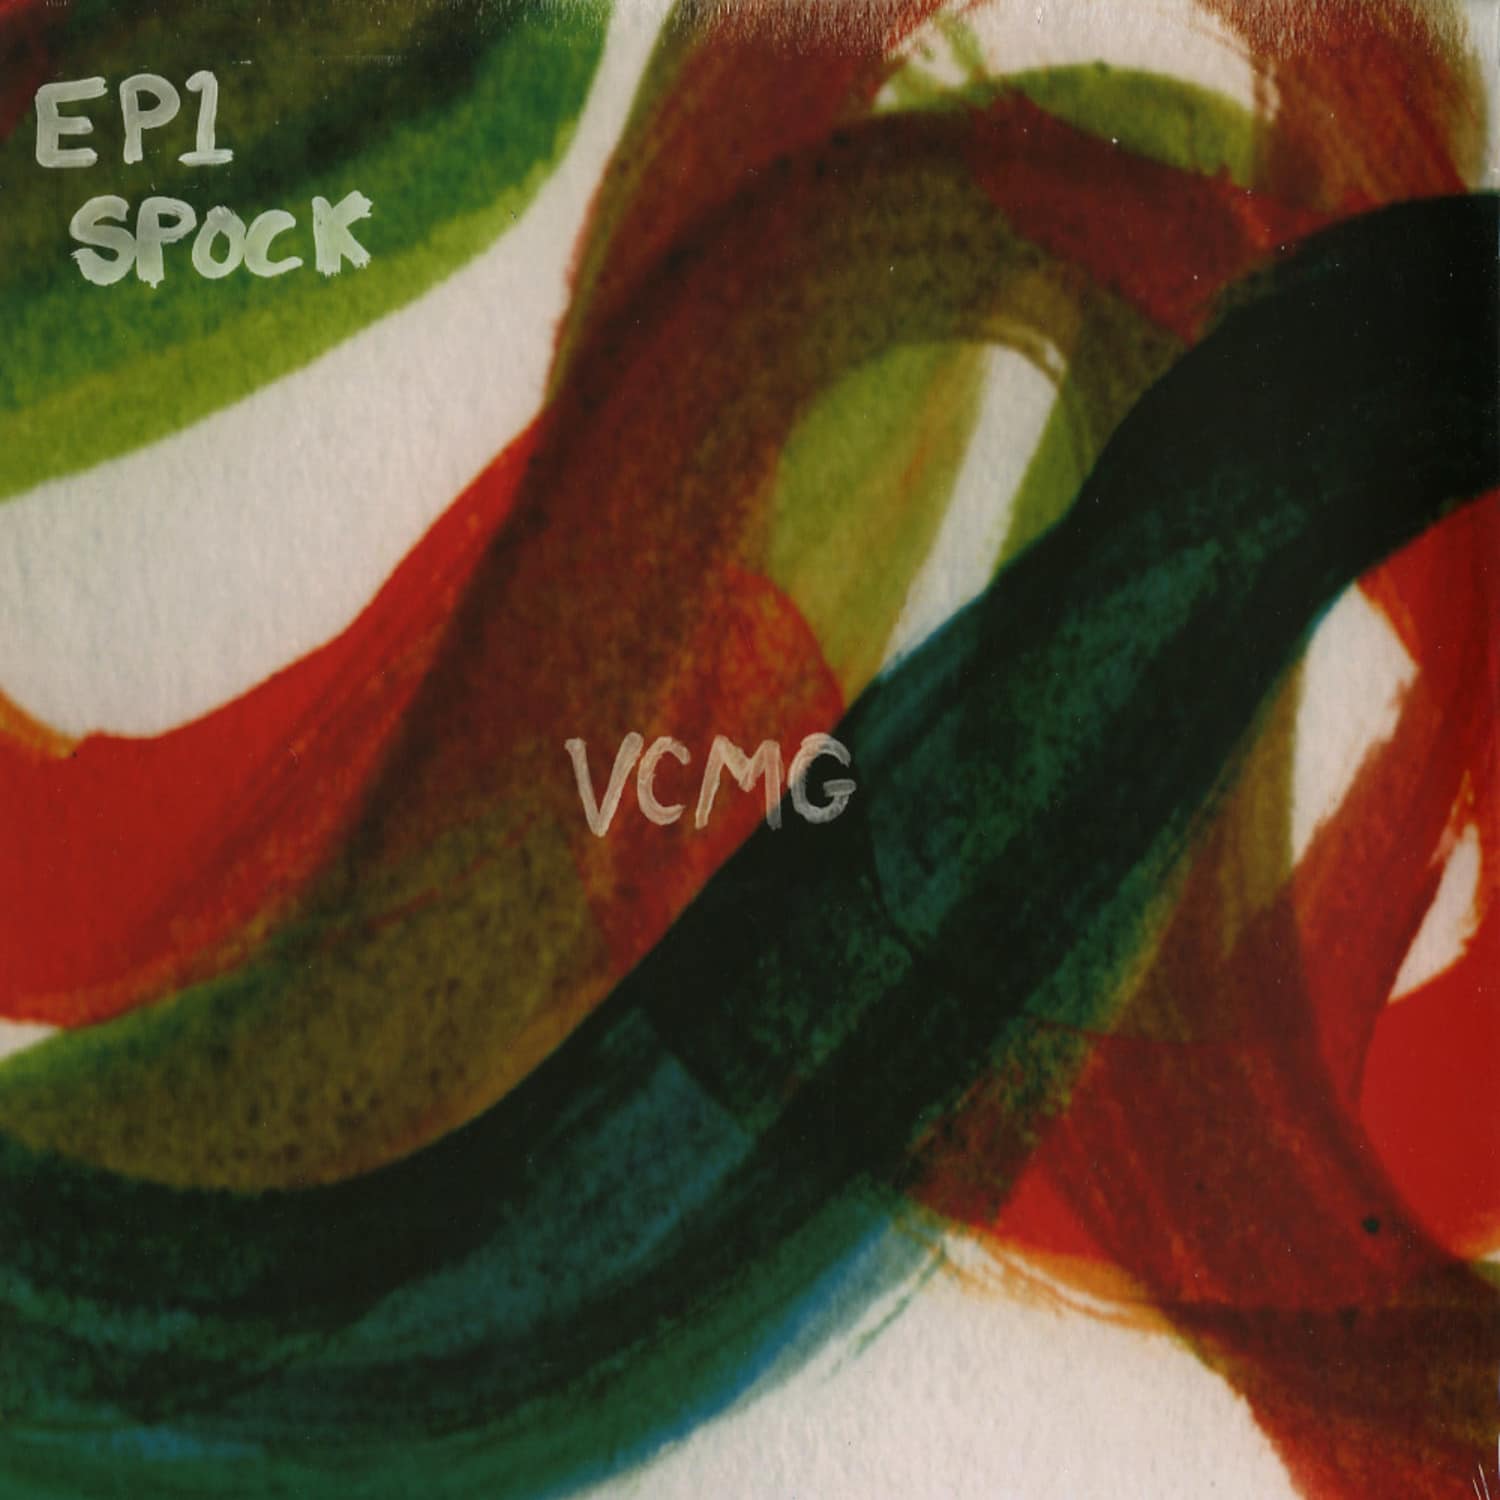 VCMG  - SPOCK EP1